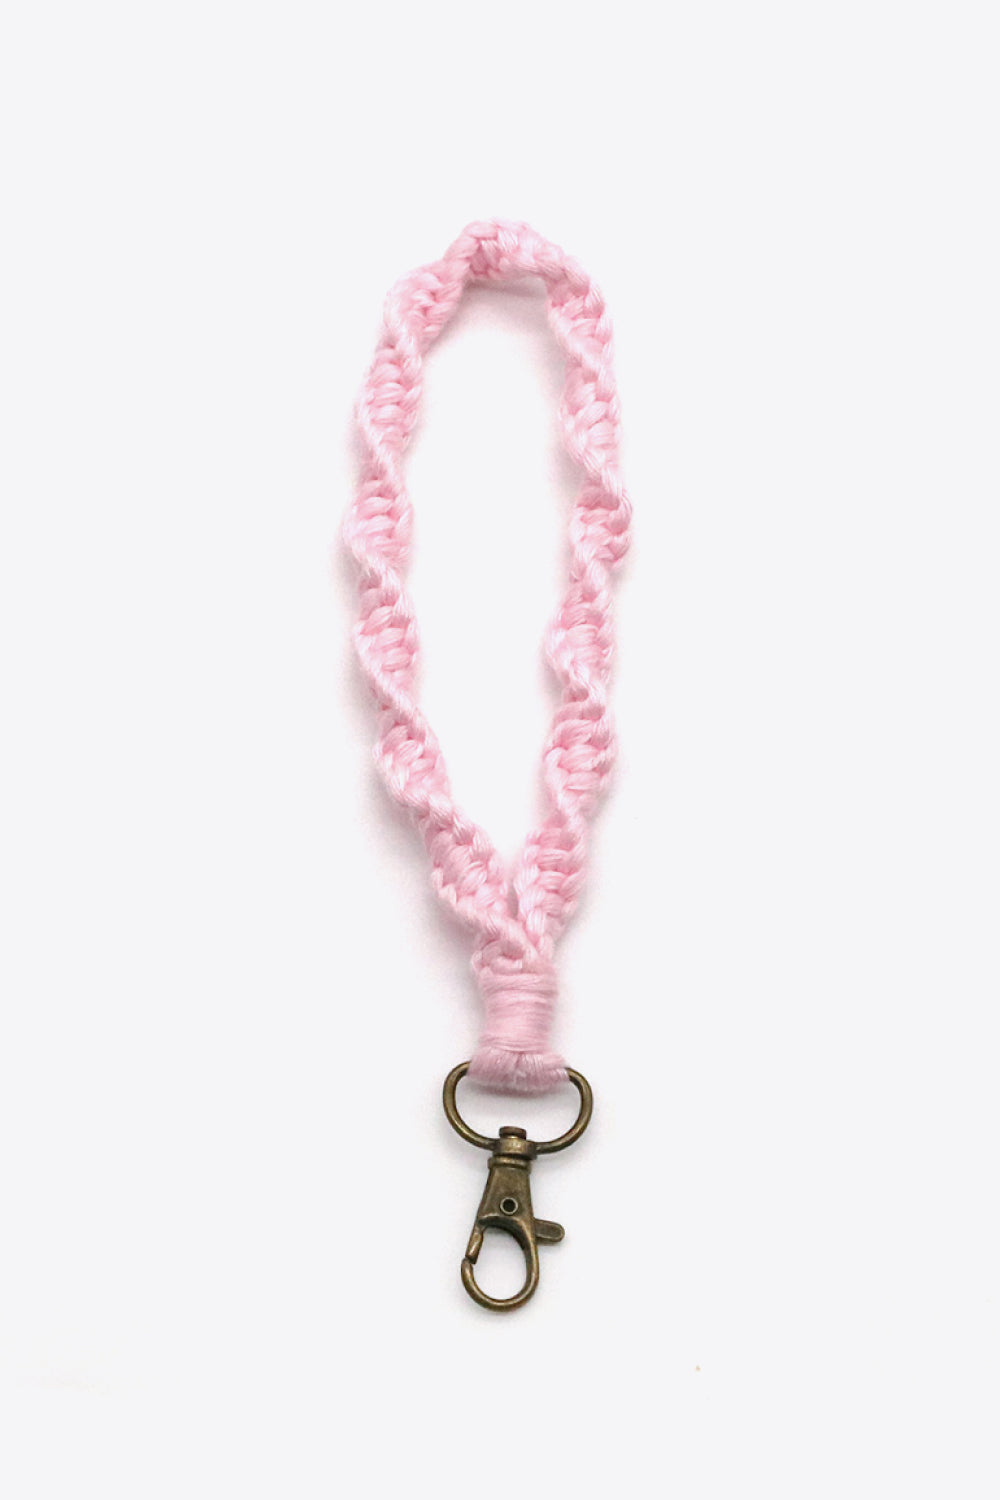 Trendsi Cupid Beauty Supplies Blush Pink / One Size Keychains 4-Pack Handmade Keychain, Color Varies